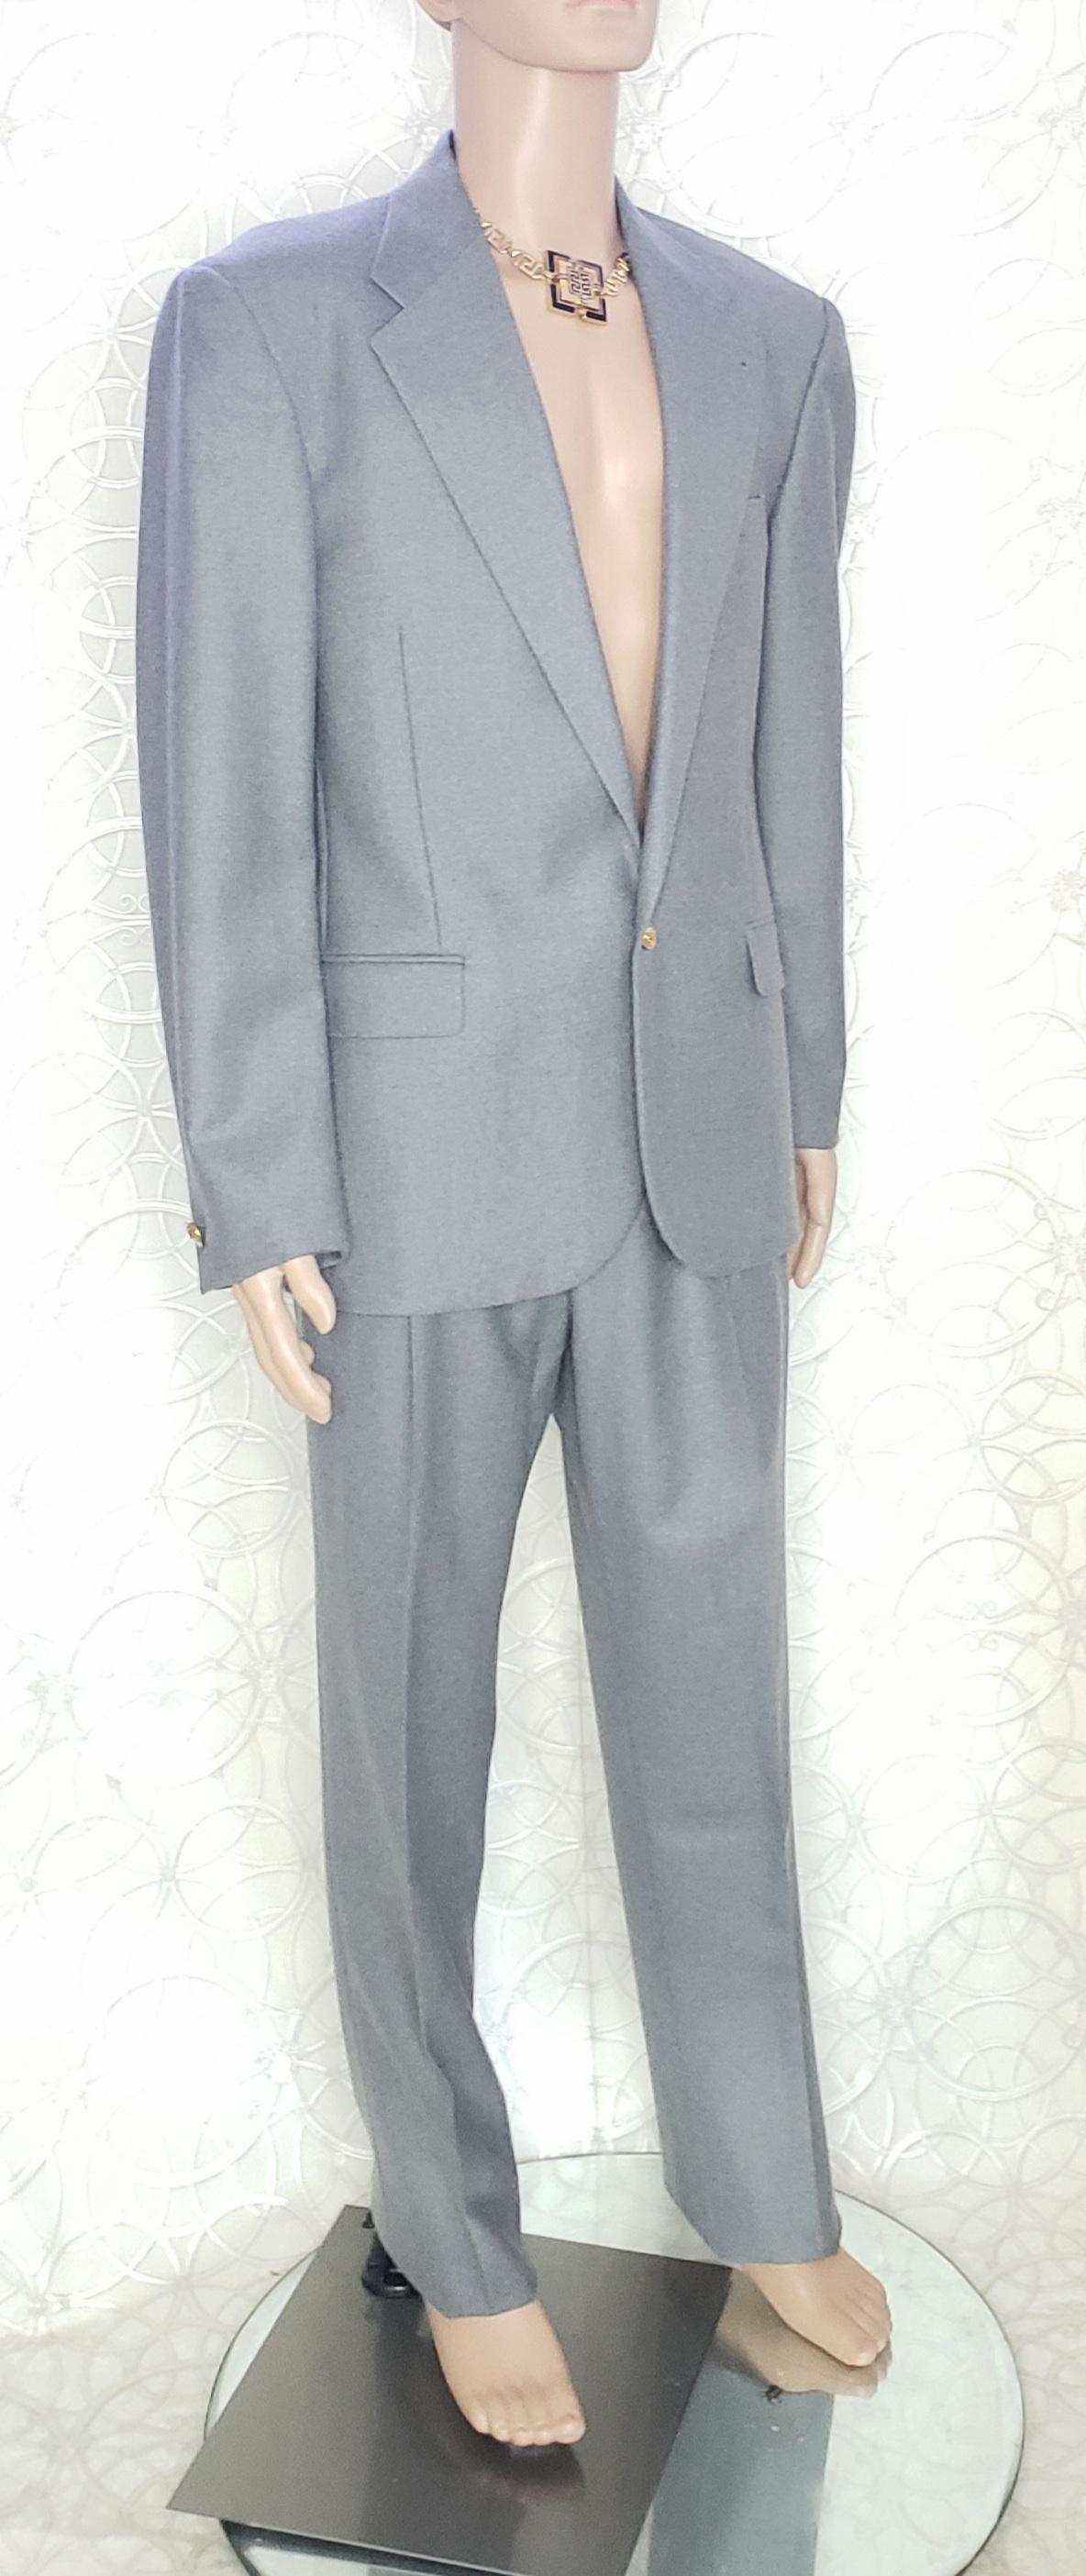 VERSACE F/W 2013 look # 45 BRAND NEW GRAY WOOL SUIT 48 - 38 (M) For Sale 3